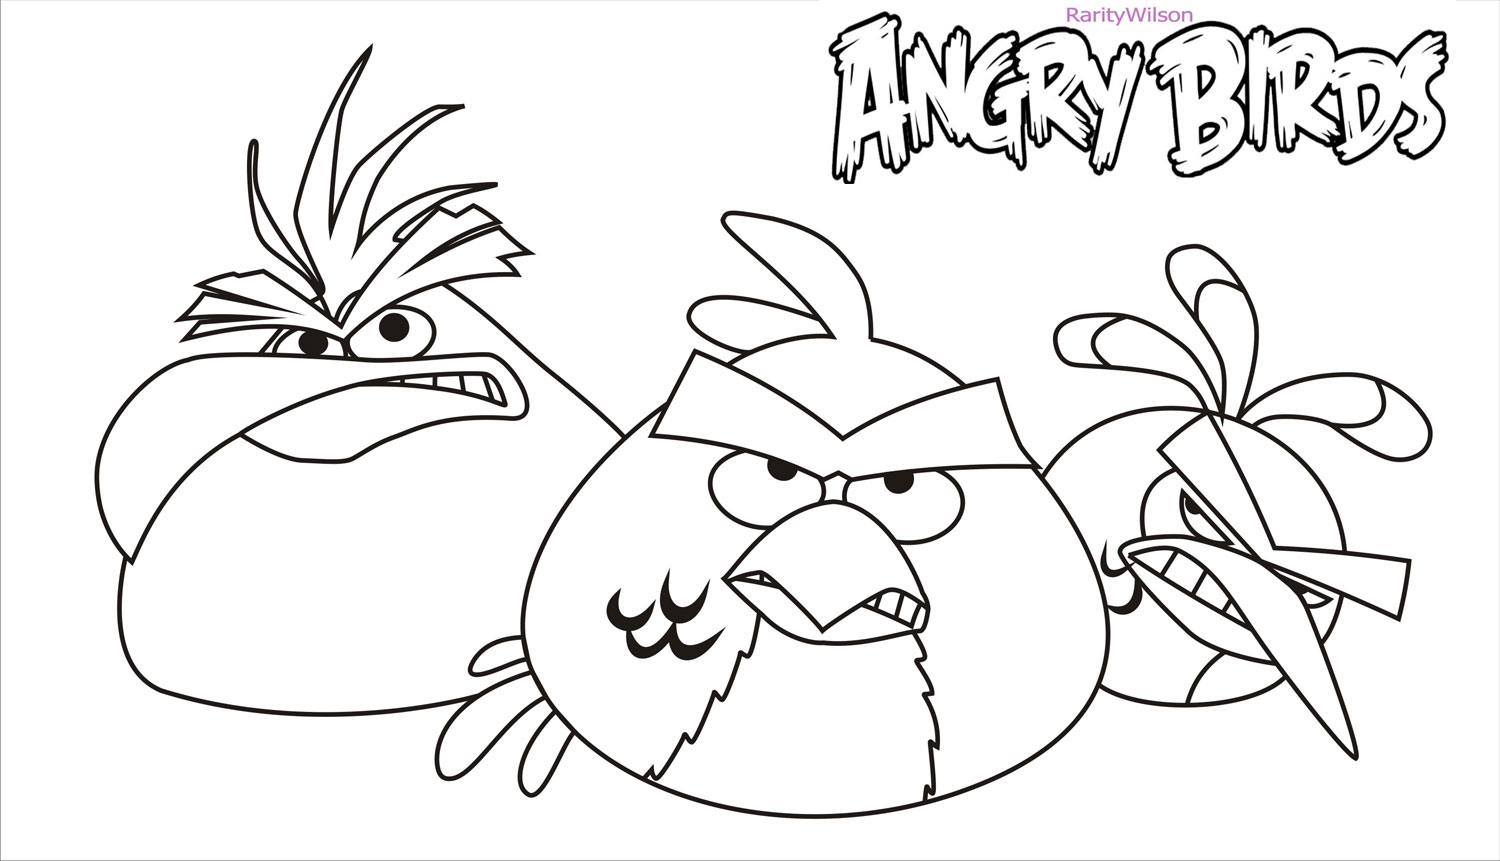 Coloriage angry birds